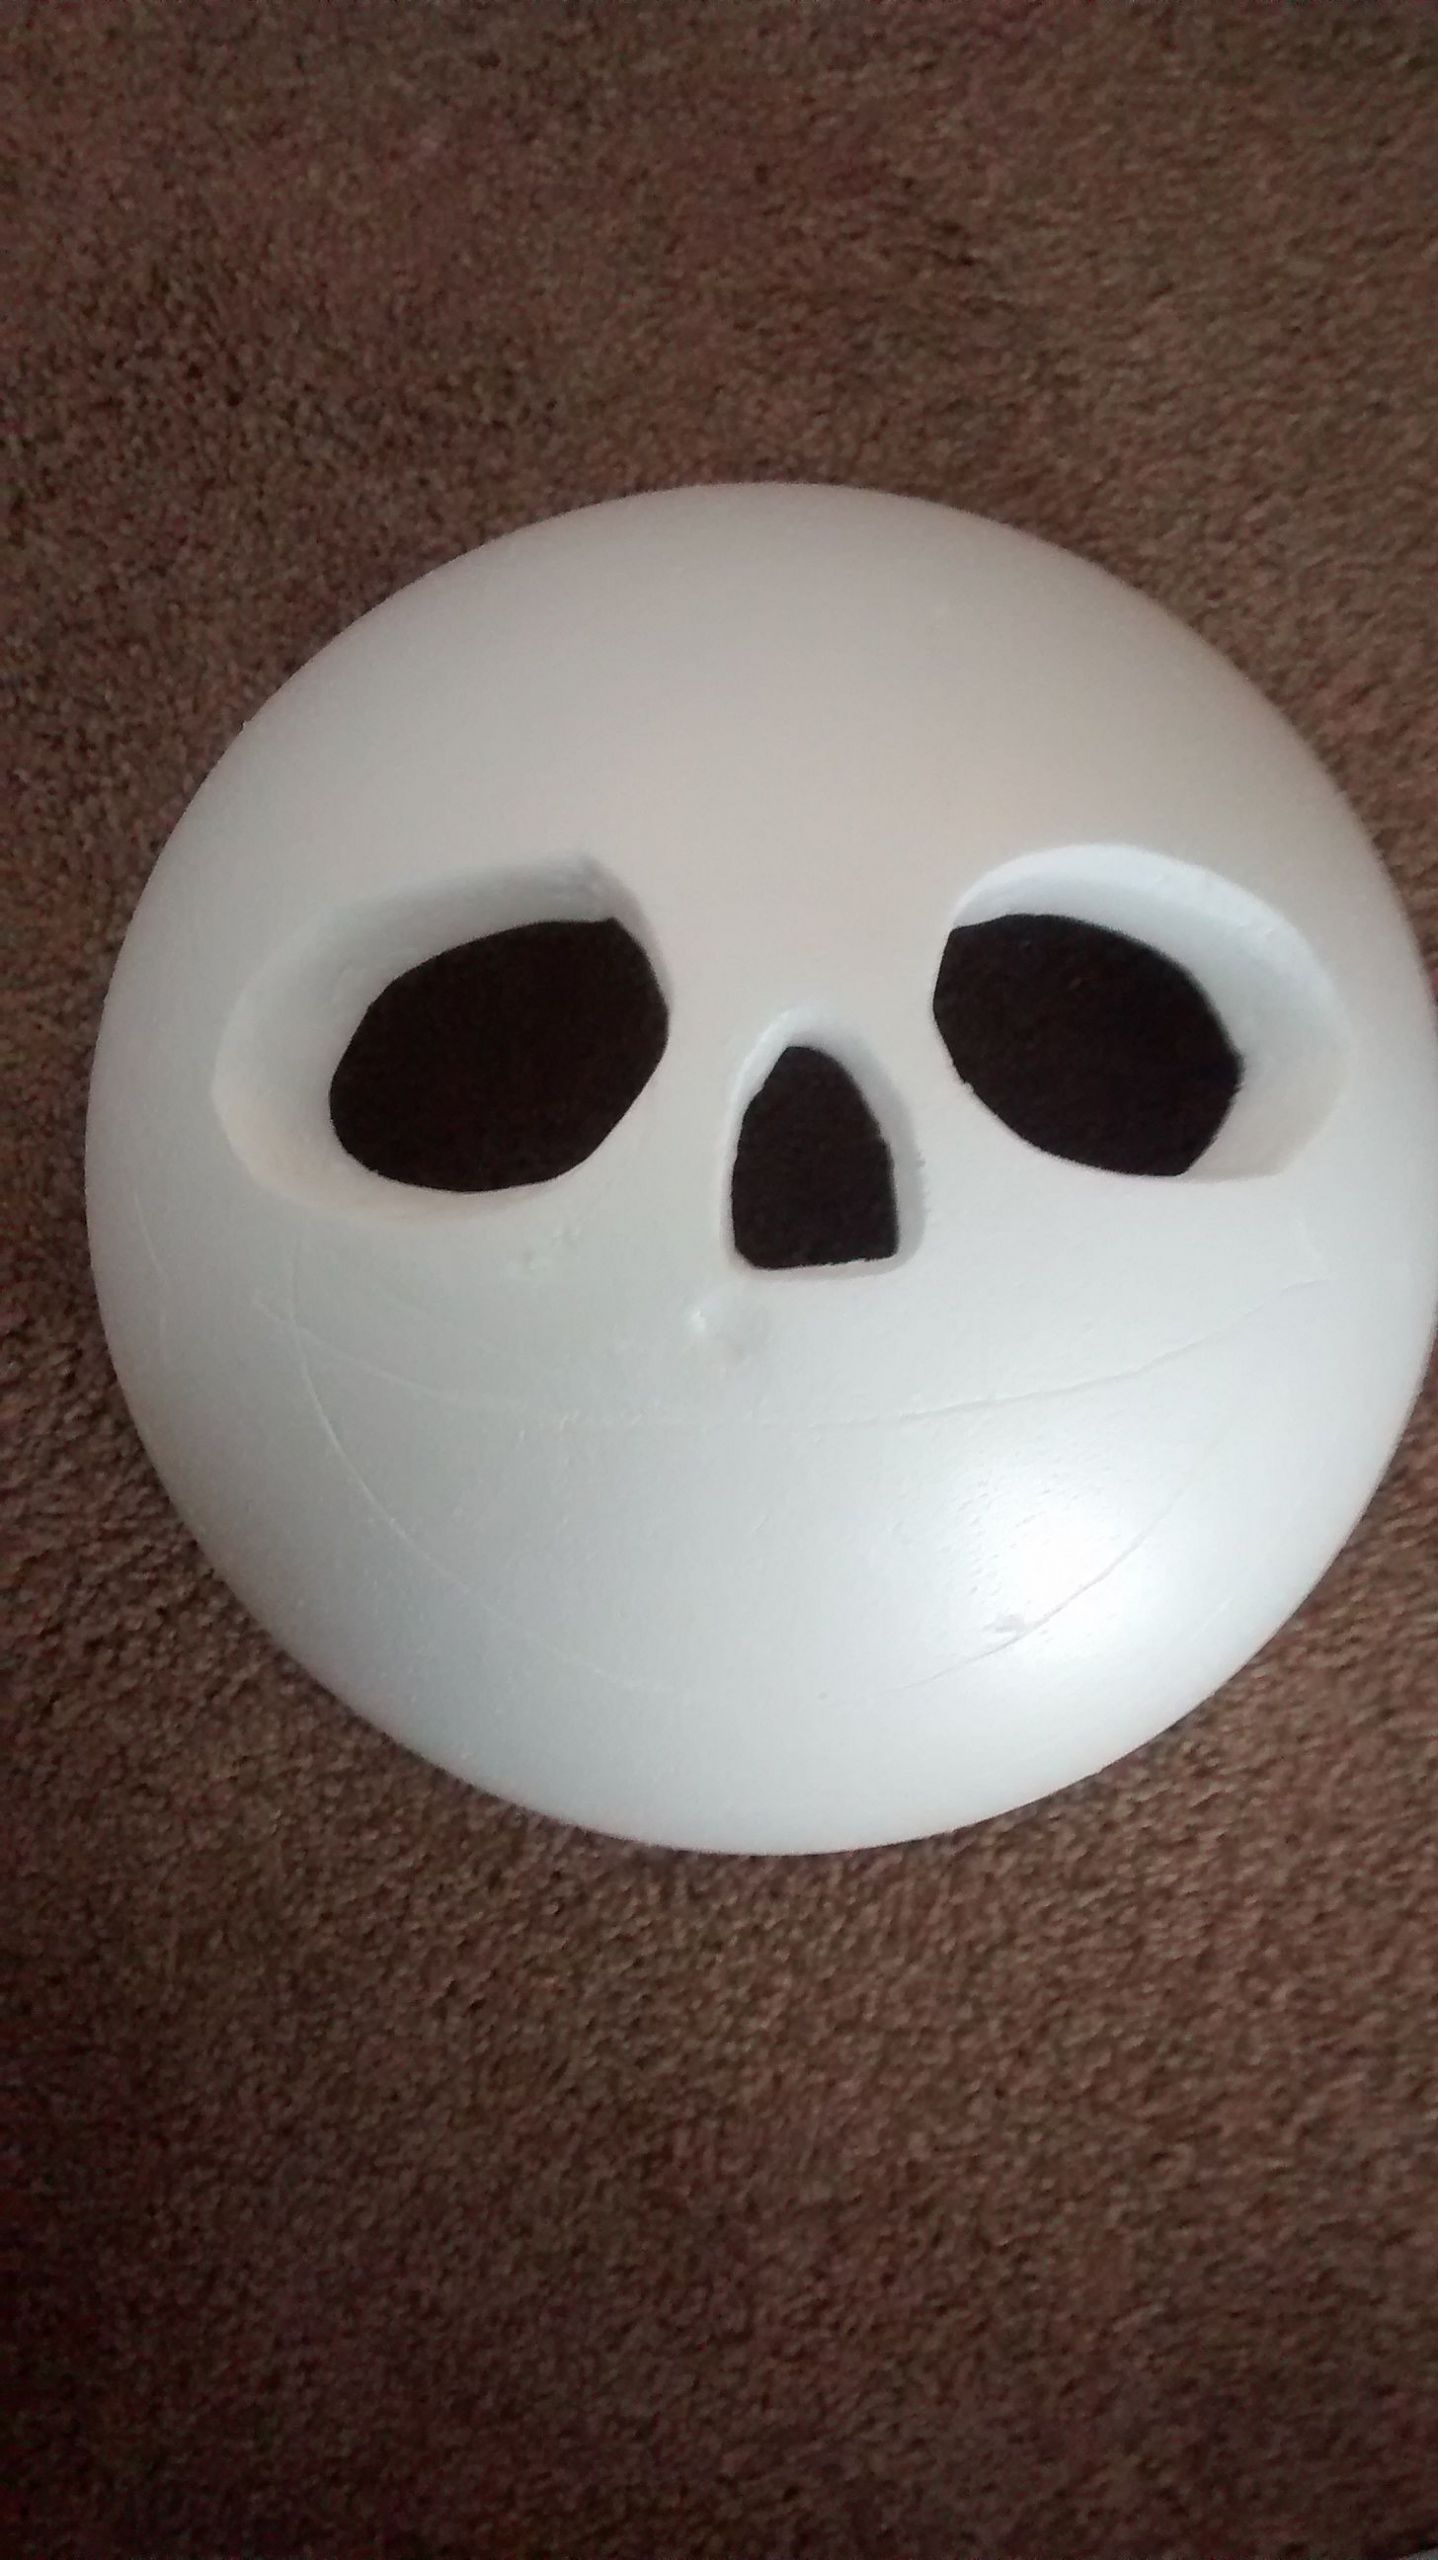 DIY Sans Mask
 The most awesome images on the Internet